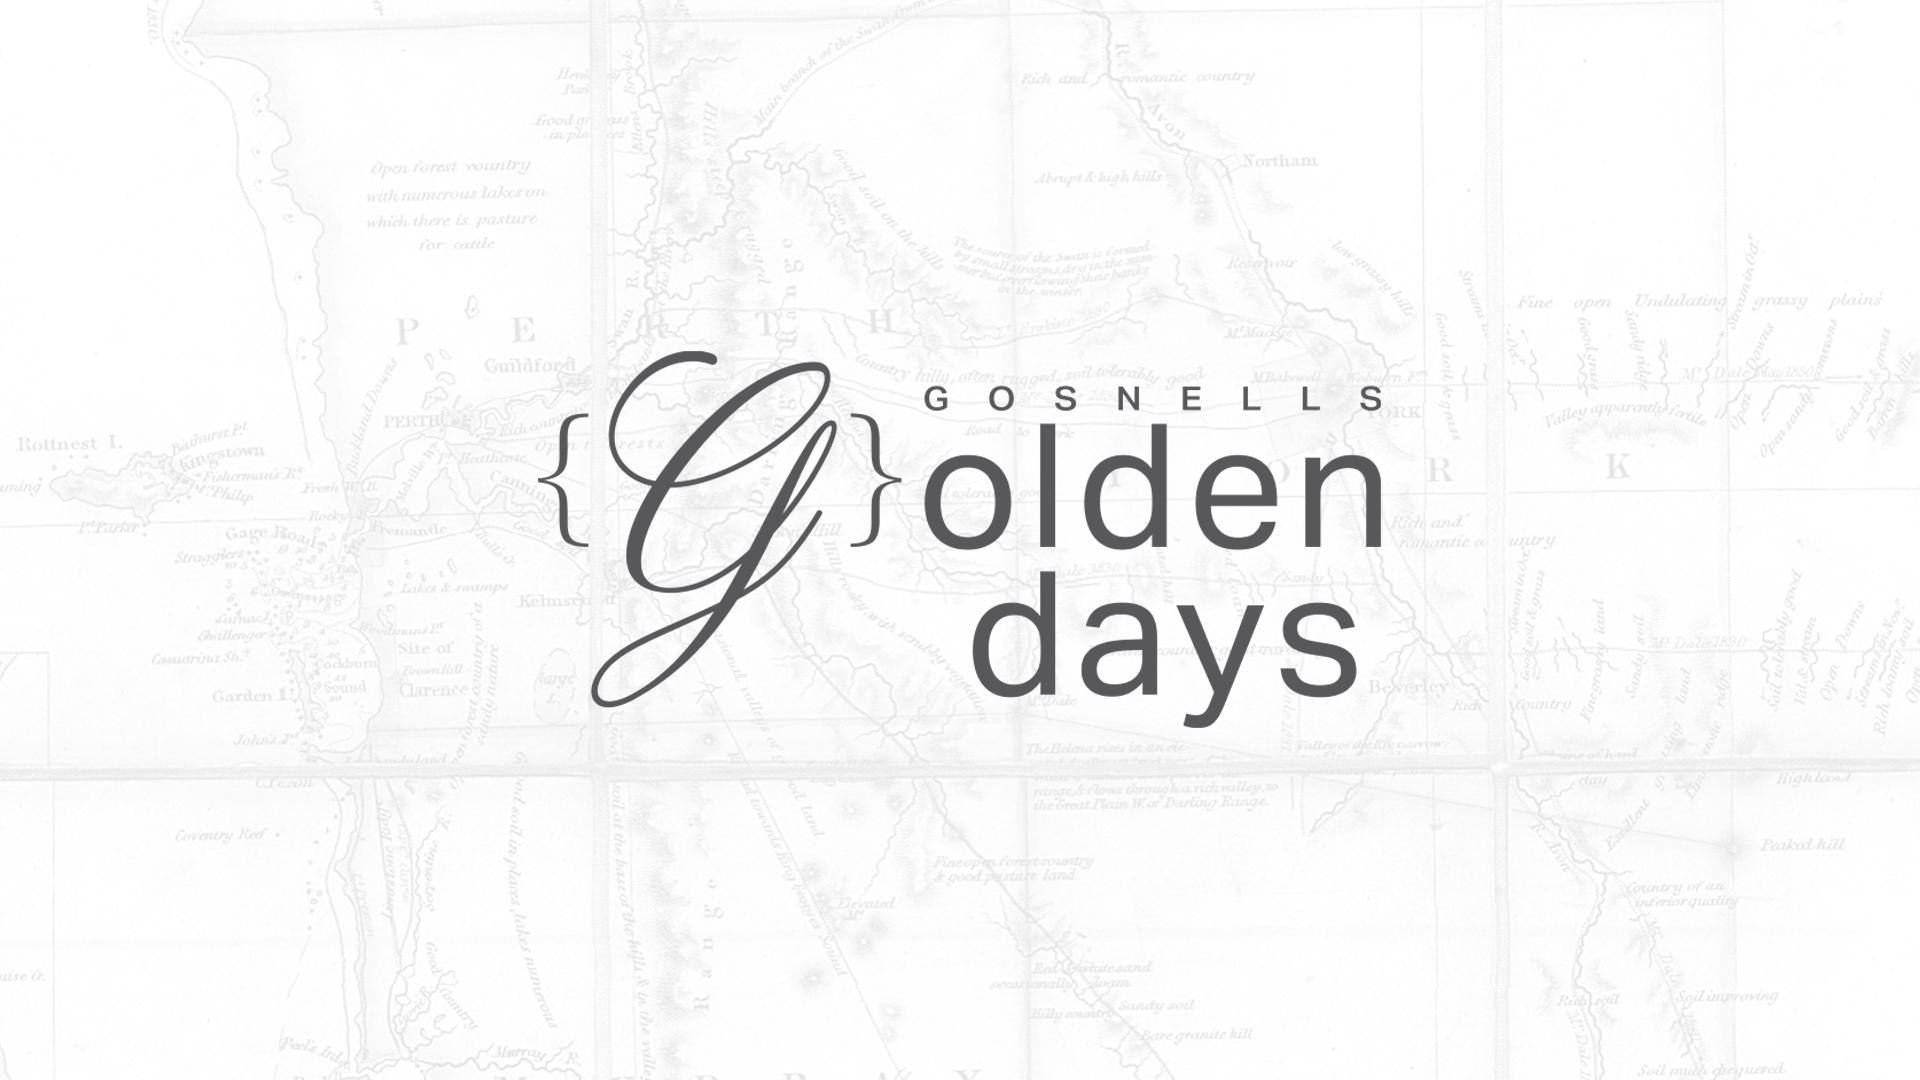 Creative Spaces - Projects - Gosnells Golden Days - Perth WA